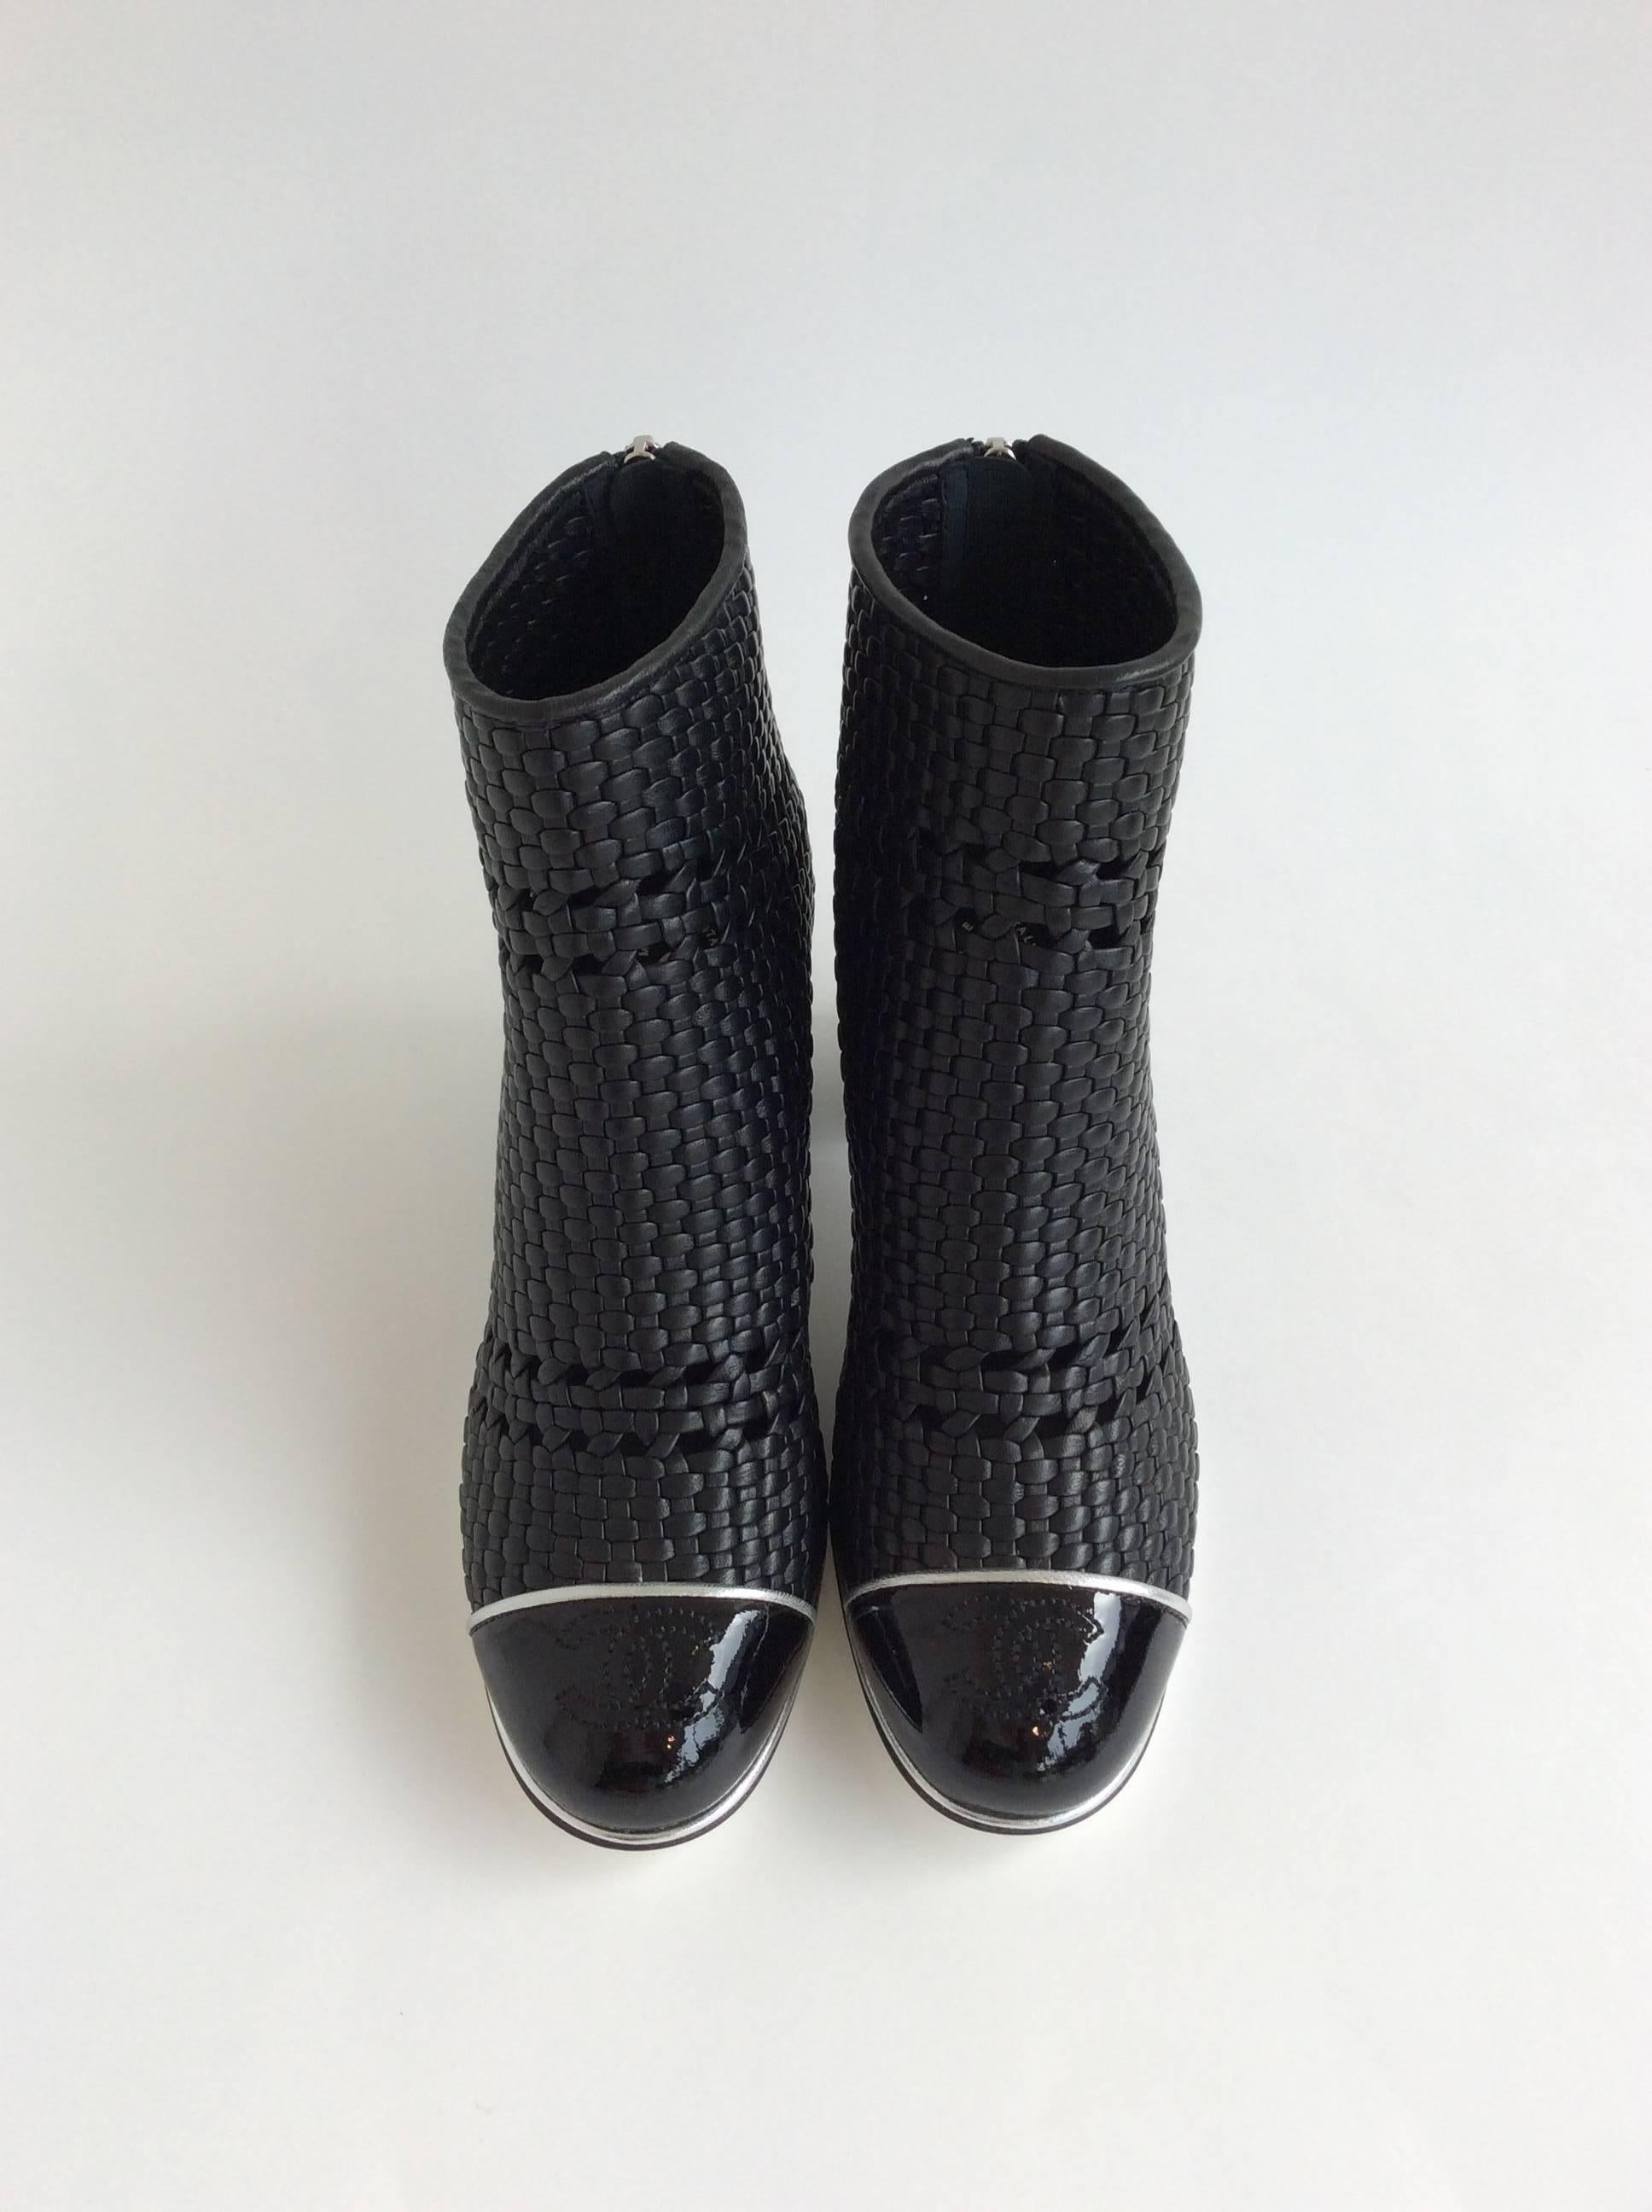 Chanel Black Woven Leather Booties With Patent Leather Toe Sz37.5 (Us7.5) In New Condition In San Francisco, CA